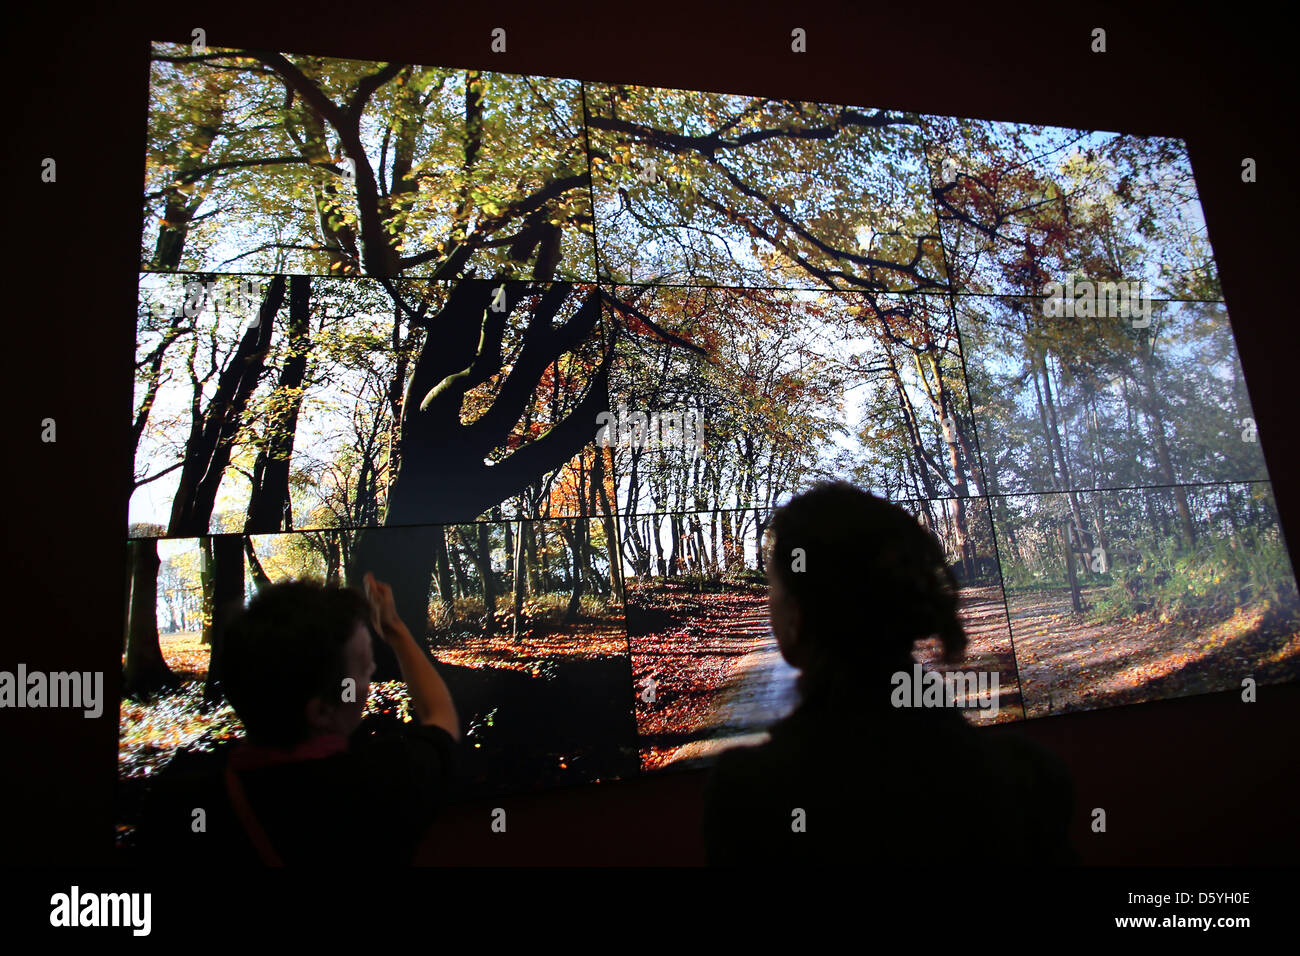 Visitor observe a video installation by artist David Hockney at Museum Ludwig in Cologne, Germany, 25 October 2012. The exhibition 'David Hockney - A Bigger Picture' is presented at Museum Ludwig between 27 October 2012 and 03 February 2013. Photo: Oliver Berg (ATTENTION: For editorial use only in connection to reports on the exhibition) Stock Photo